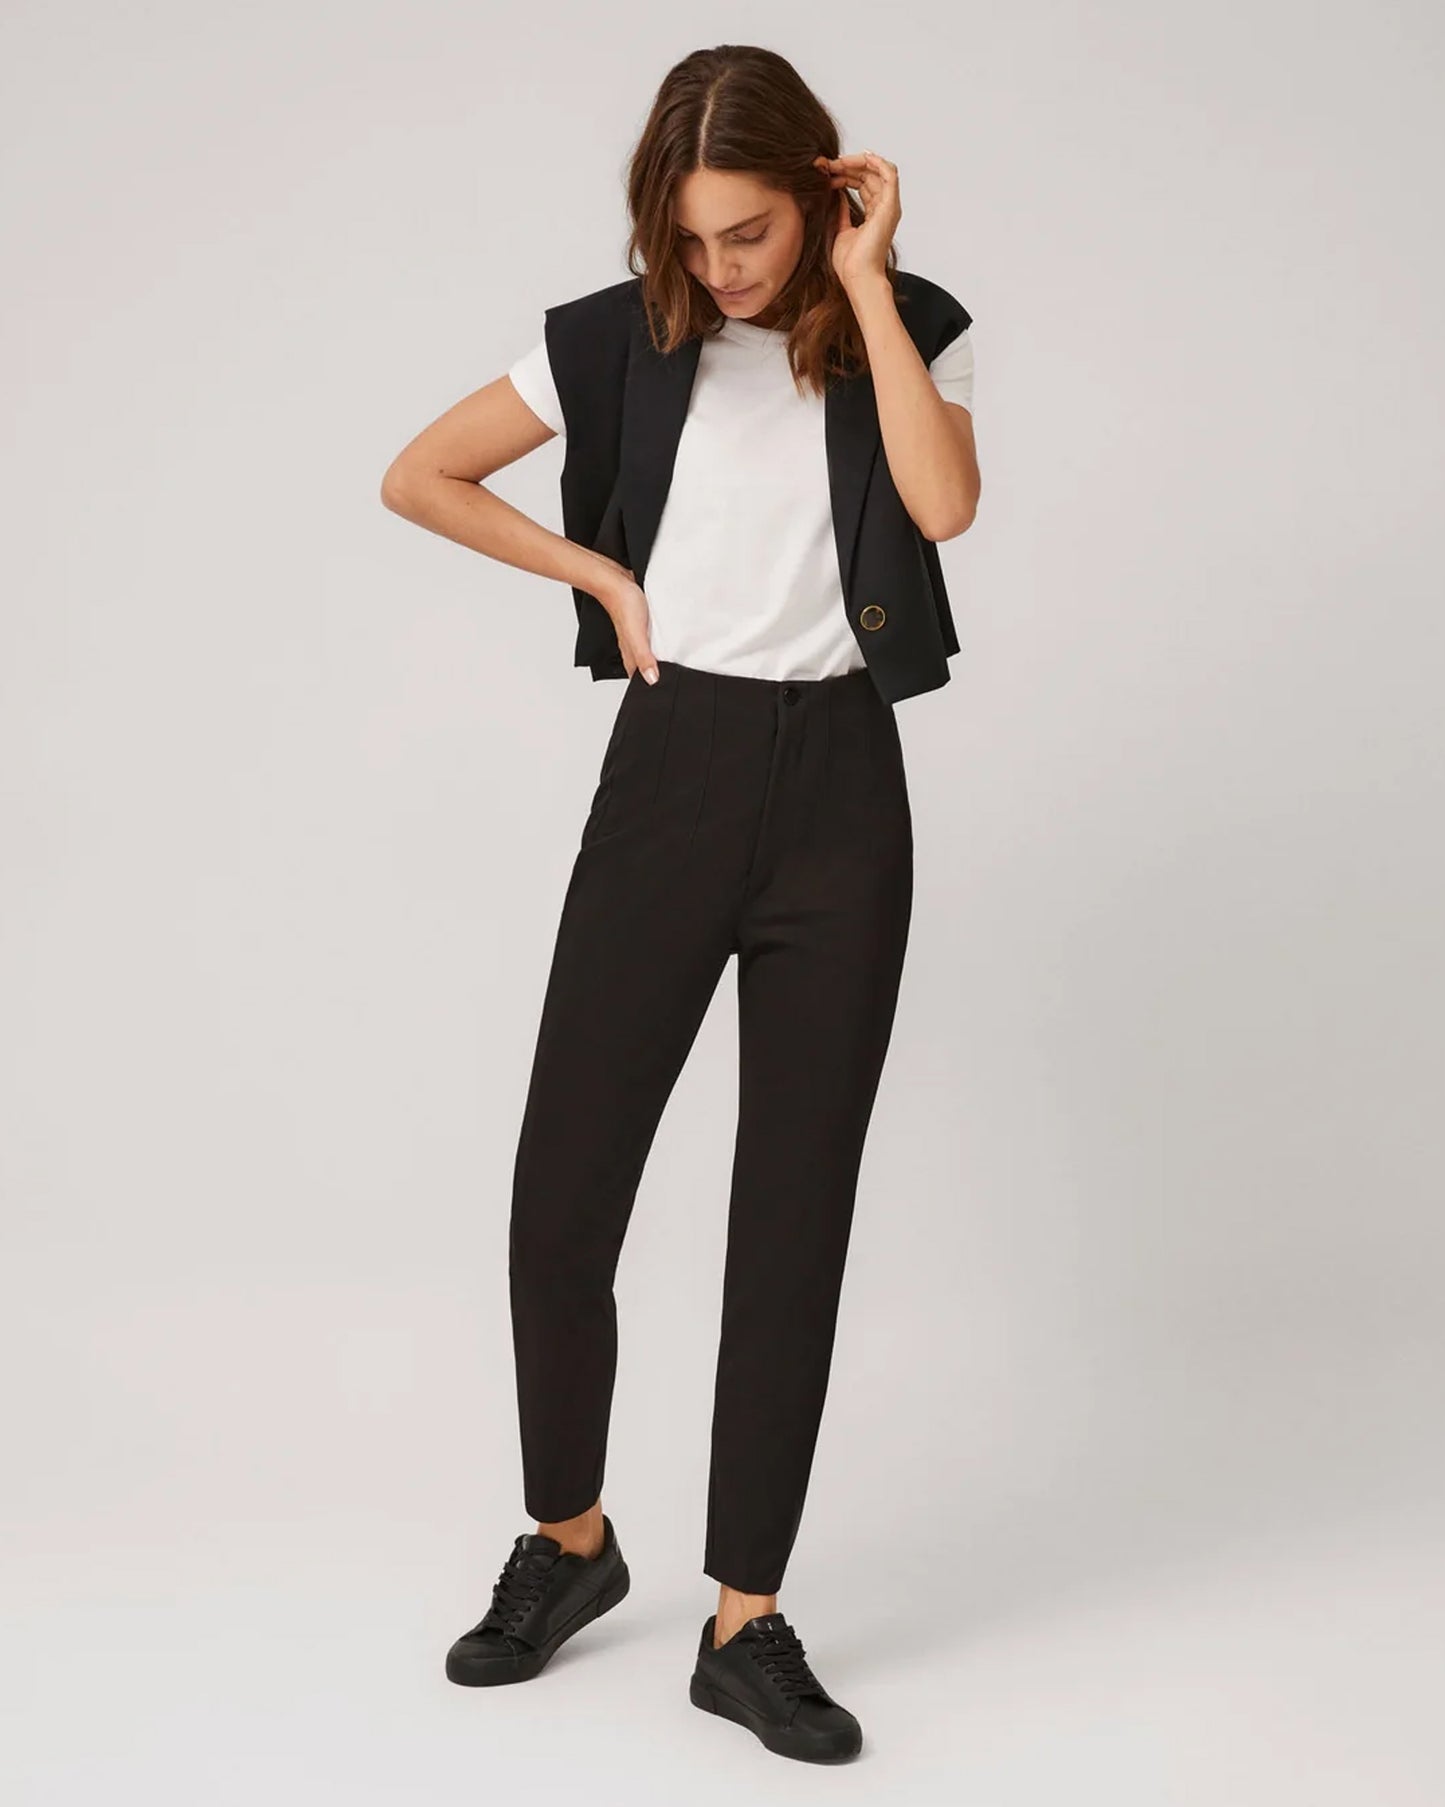 Ysabel Mora 70403 High Waist Trousers - Black suit style high waisted pants with pleated darts, invisible front zipper and button, worn with white t-shirt, waist coat and black sneakers